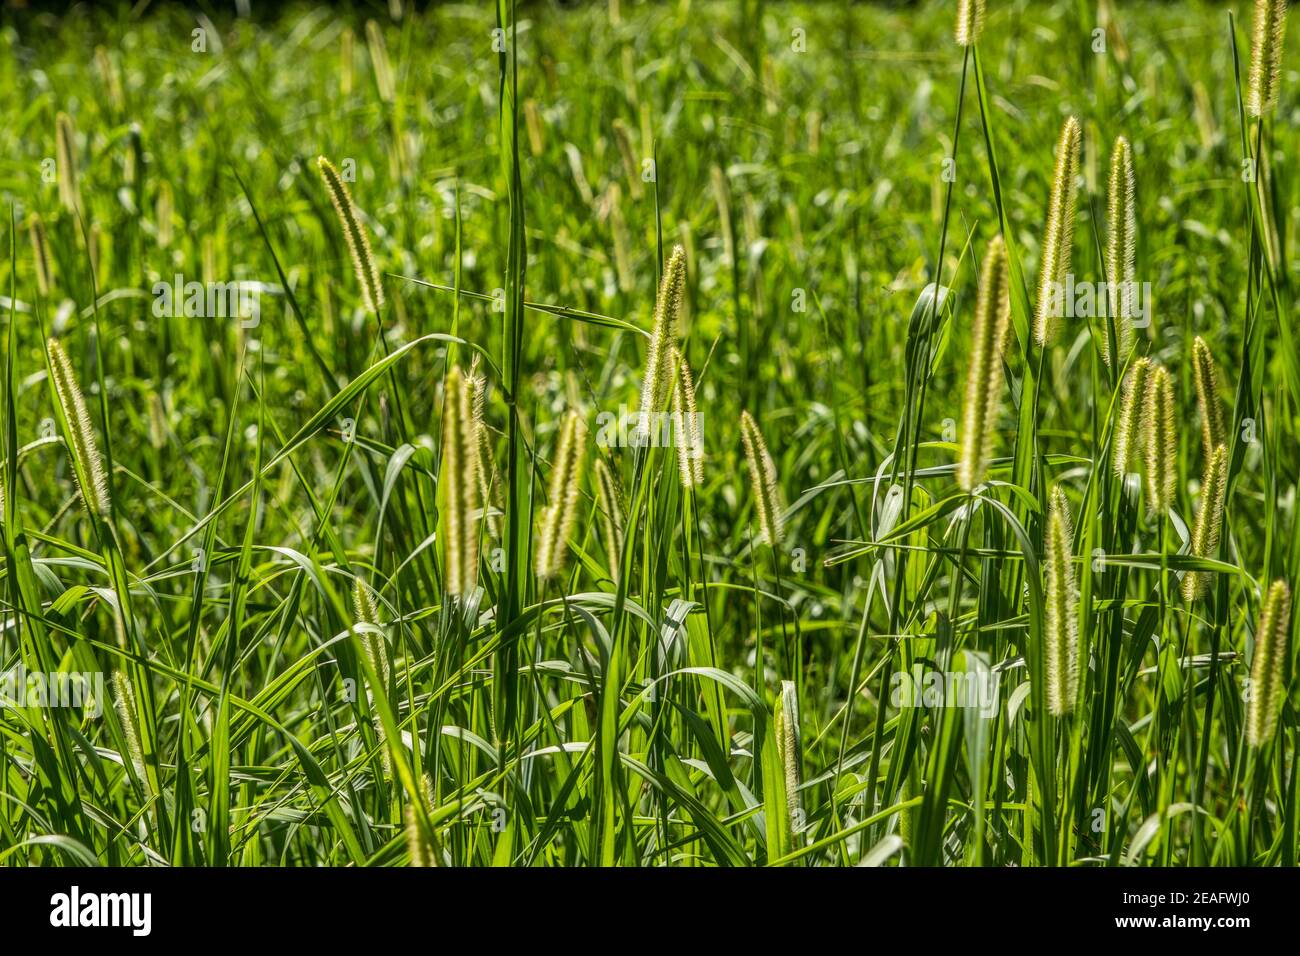 The sunlight glowing through the field back lighting the seed heads of the foxtail grass closeup on a sunny day in summer backgrounds and textures Stock Photo